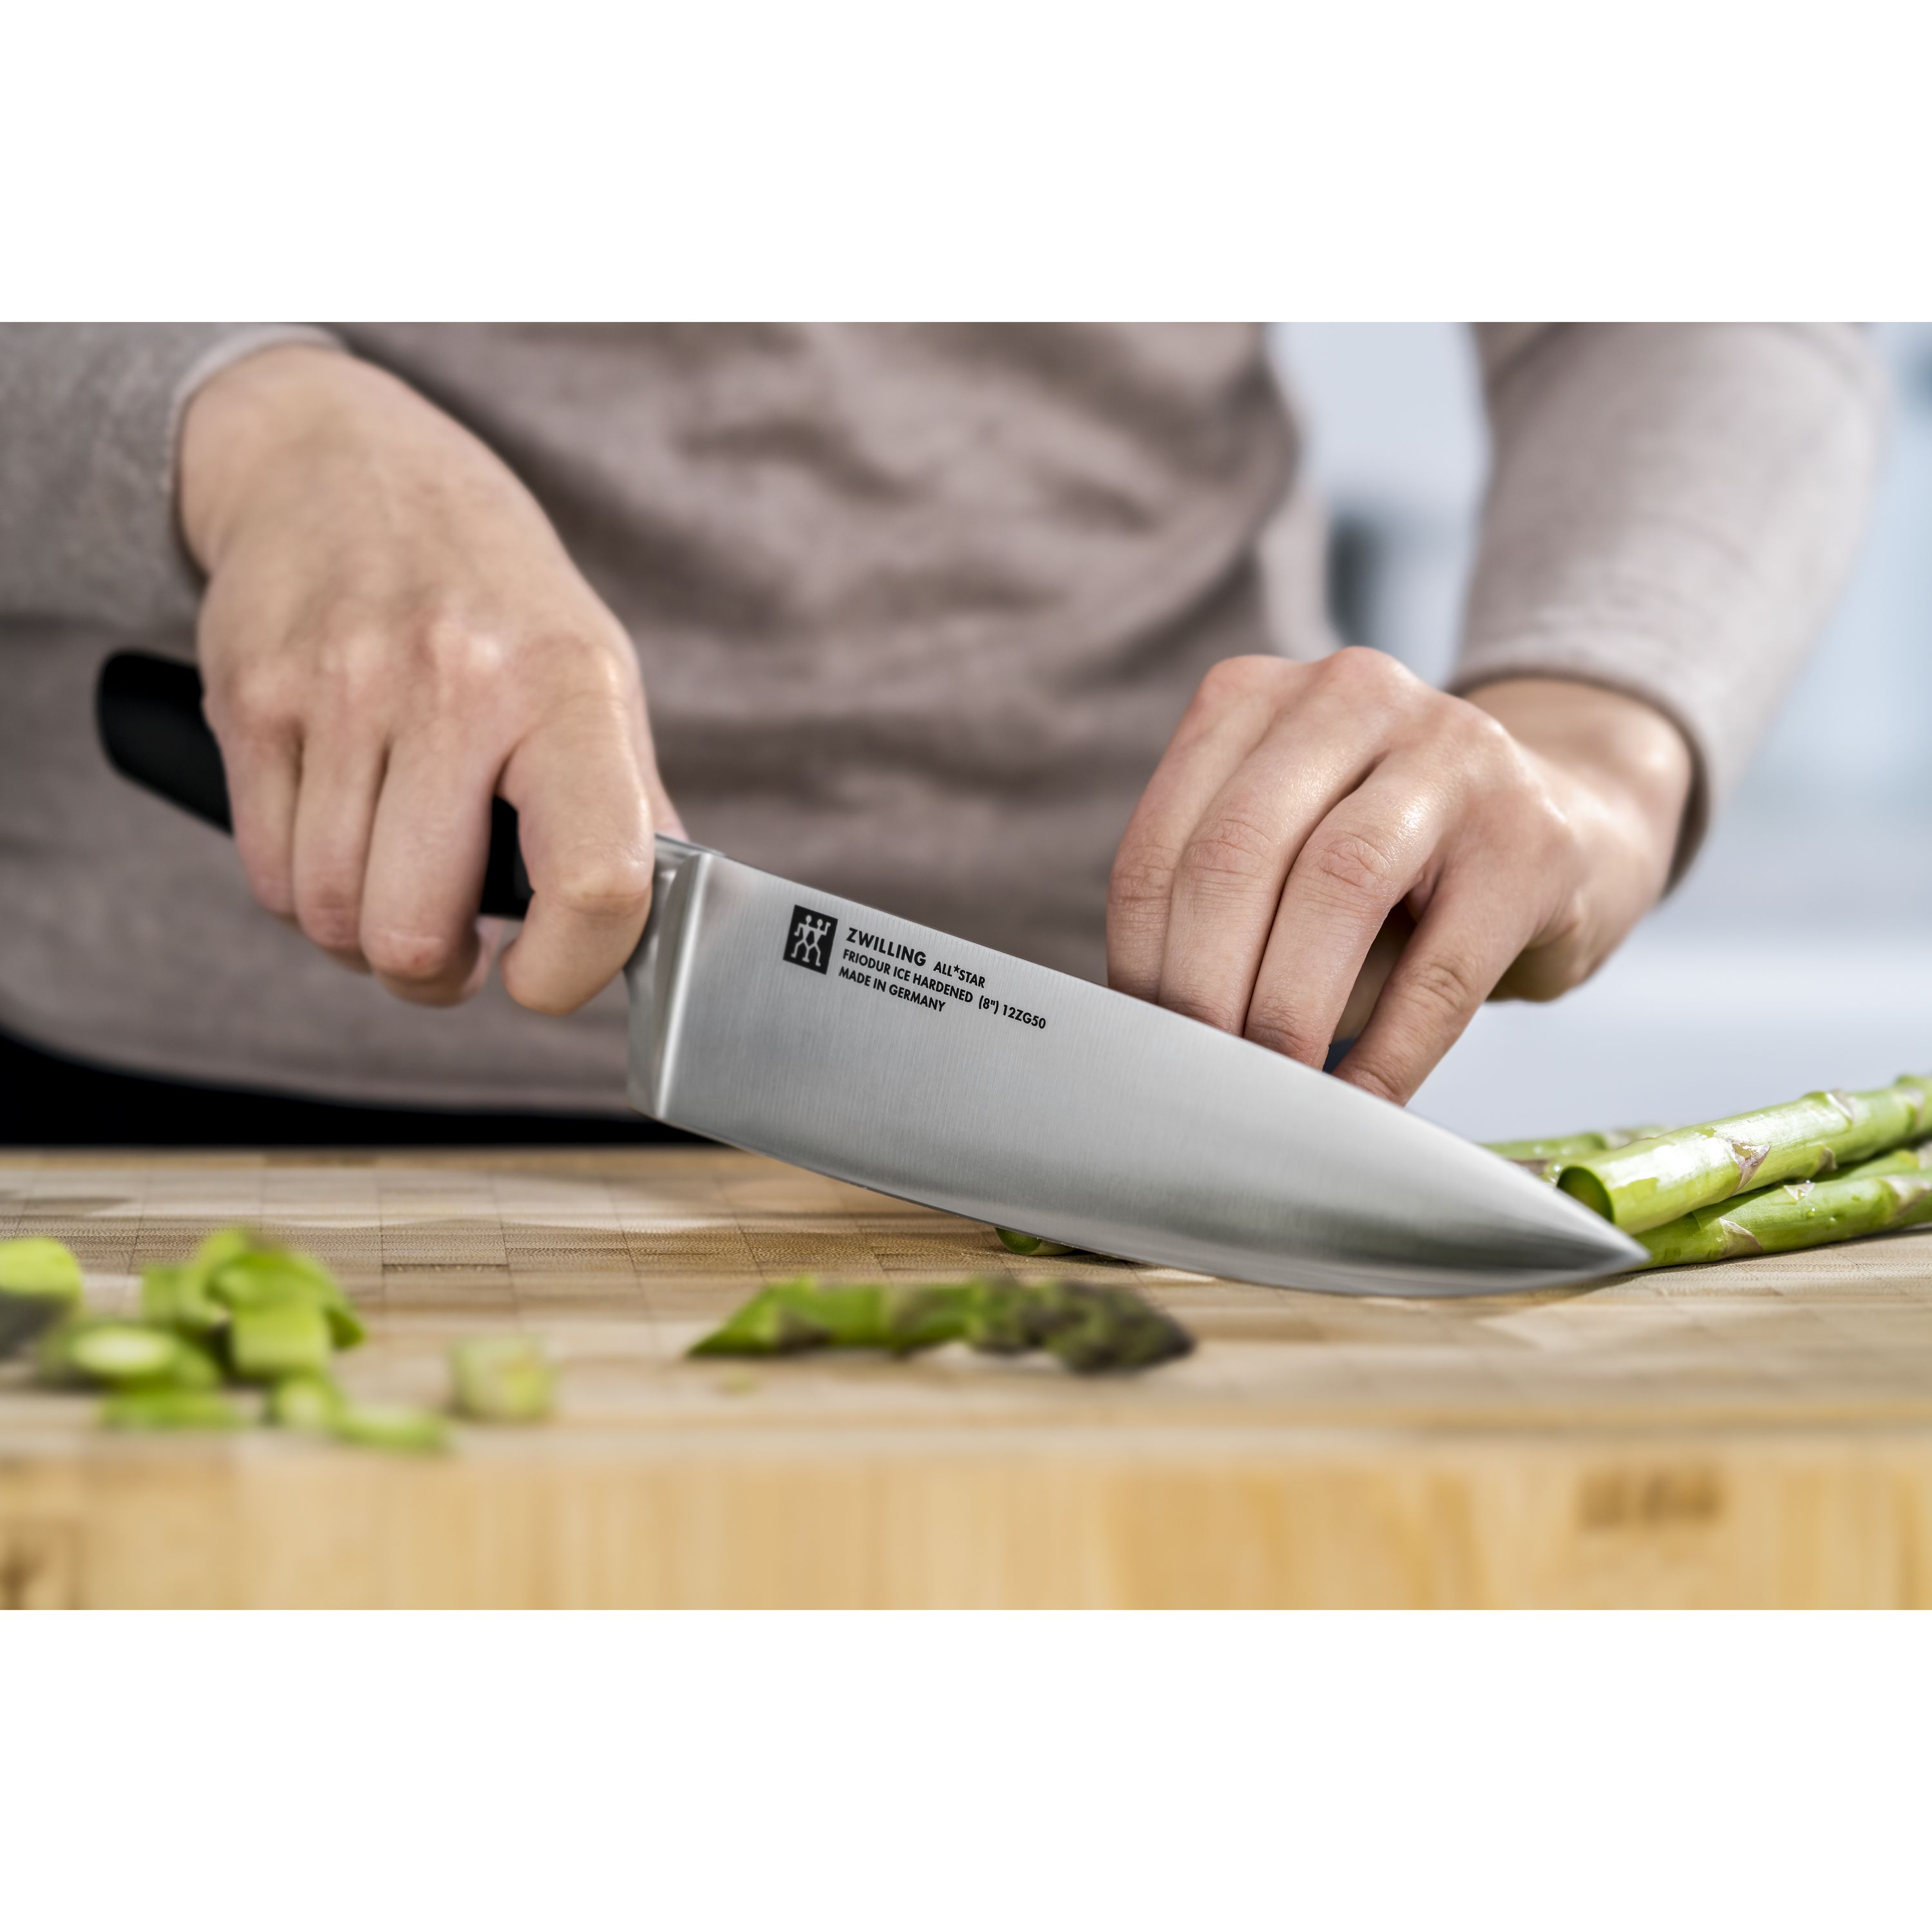 ZWILLING All * Star 8-inch, Chef's knife, black matte